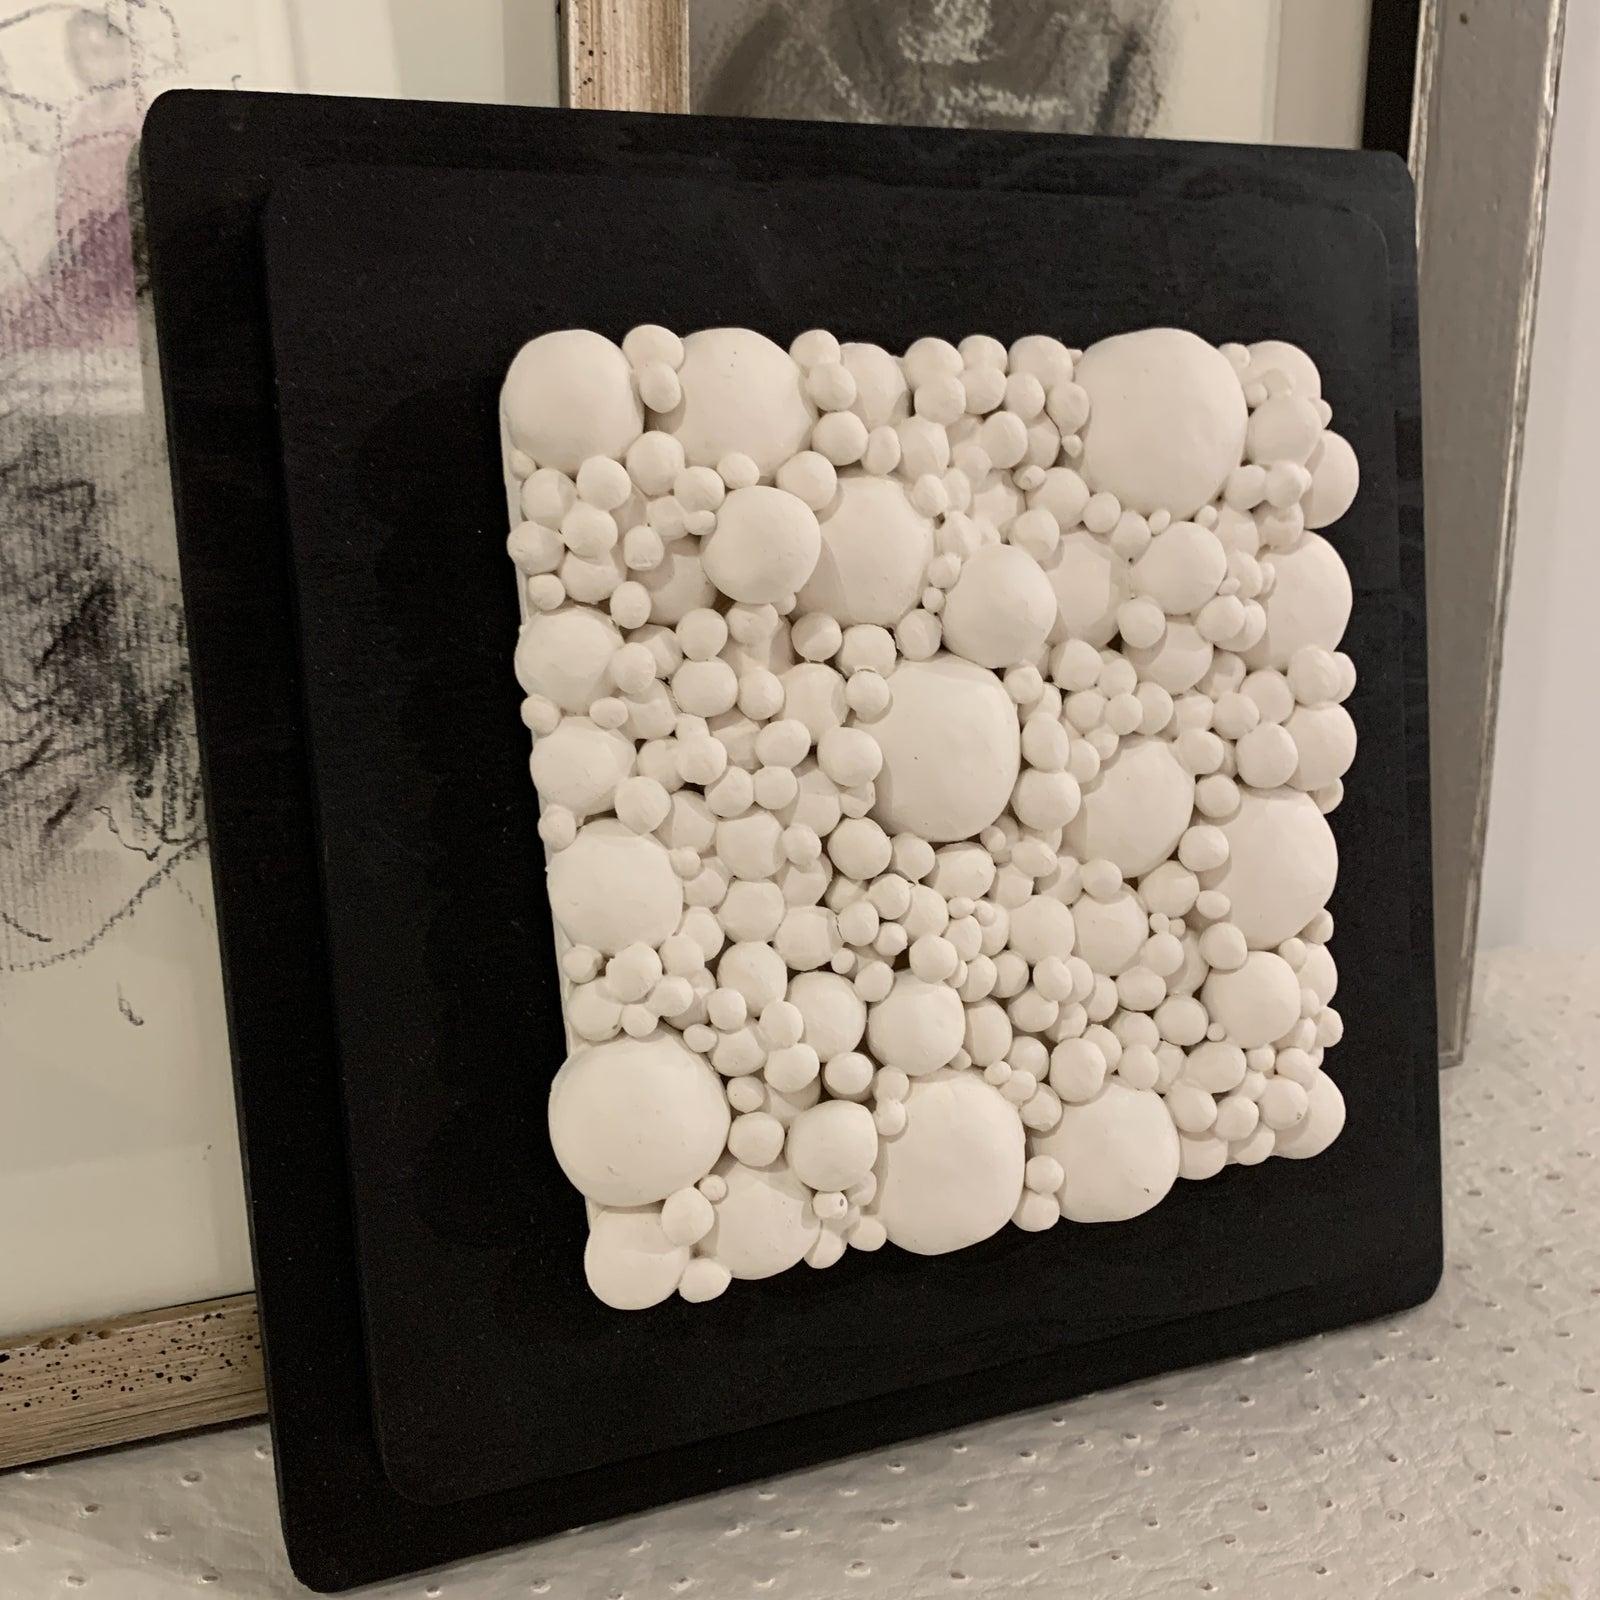 Stunning handmade pottery on custom wooden wall plaque. This ceramic design can be hung on a wall or layed on a table for display.
The gallery has a very small collection in black and white in this vein. Each piece is sold individually and had its